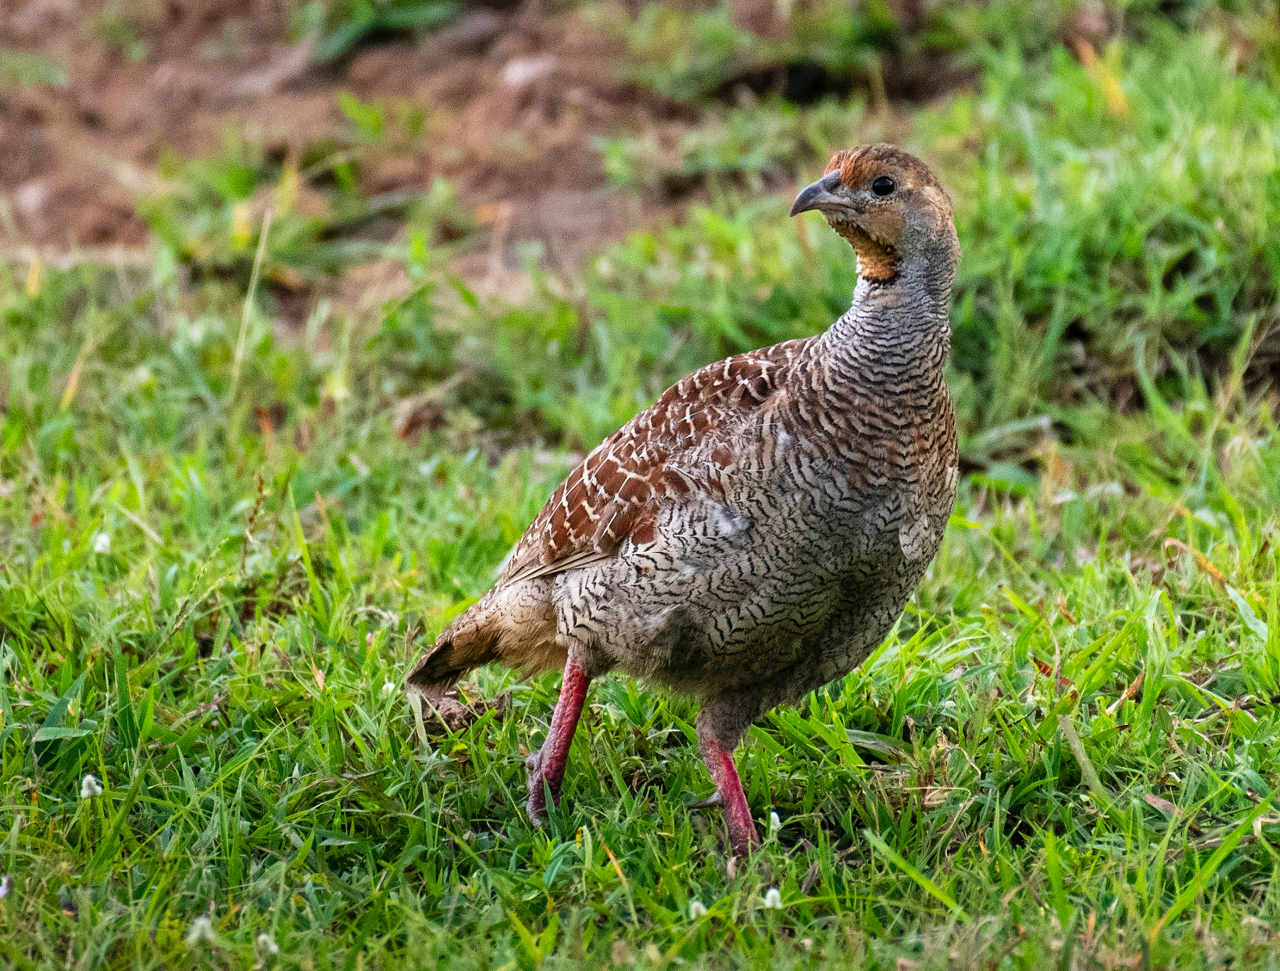 Image of a quail standing in grass.